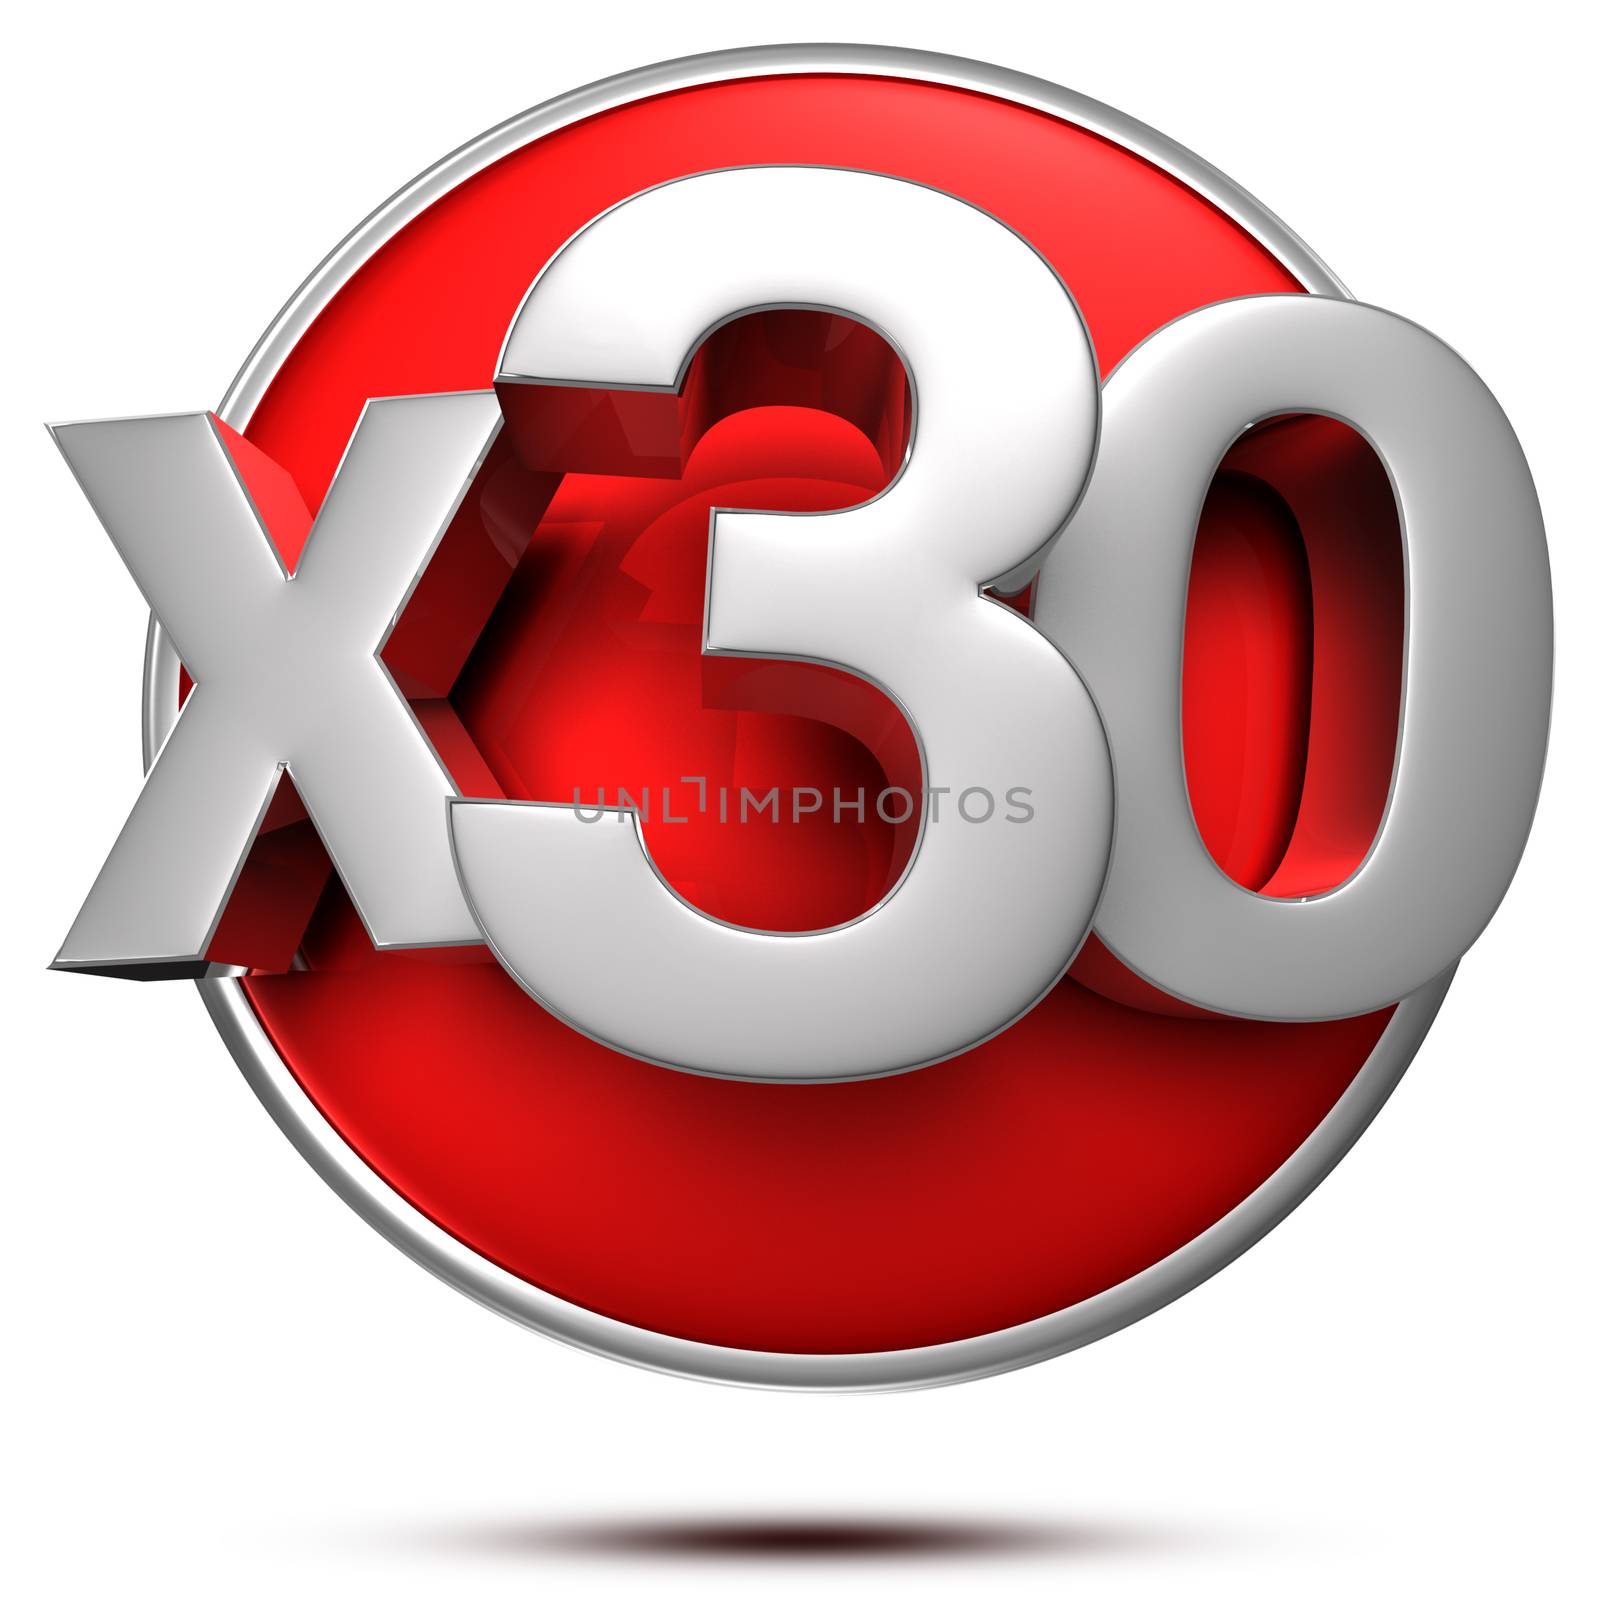 x30 3d rendering on white background.(with Clipping Path).